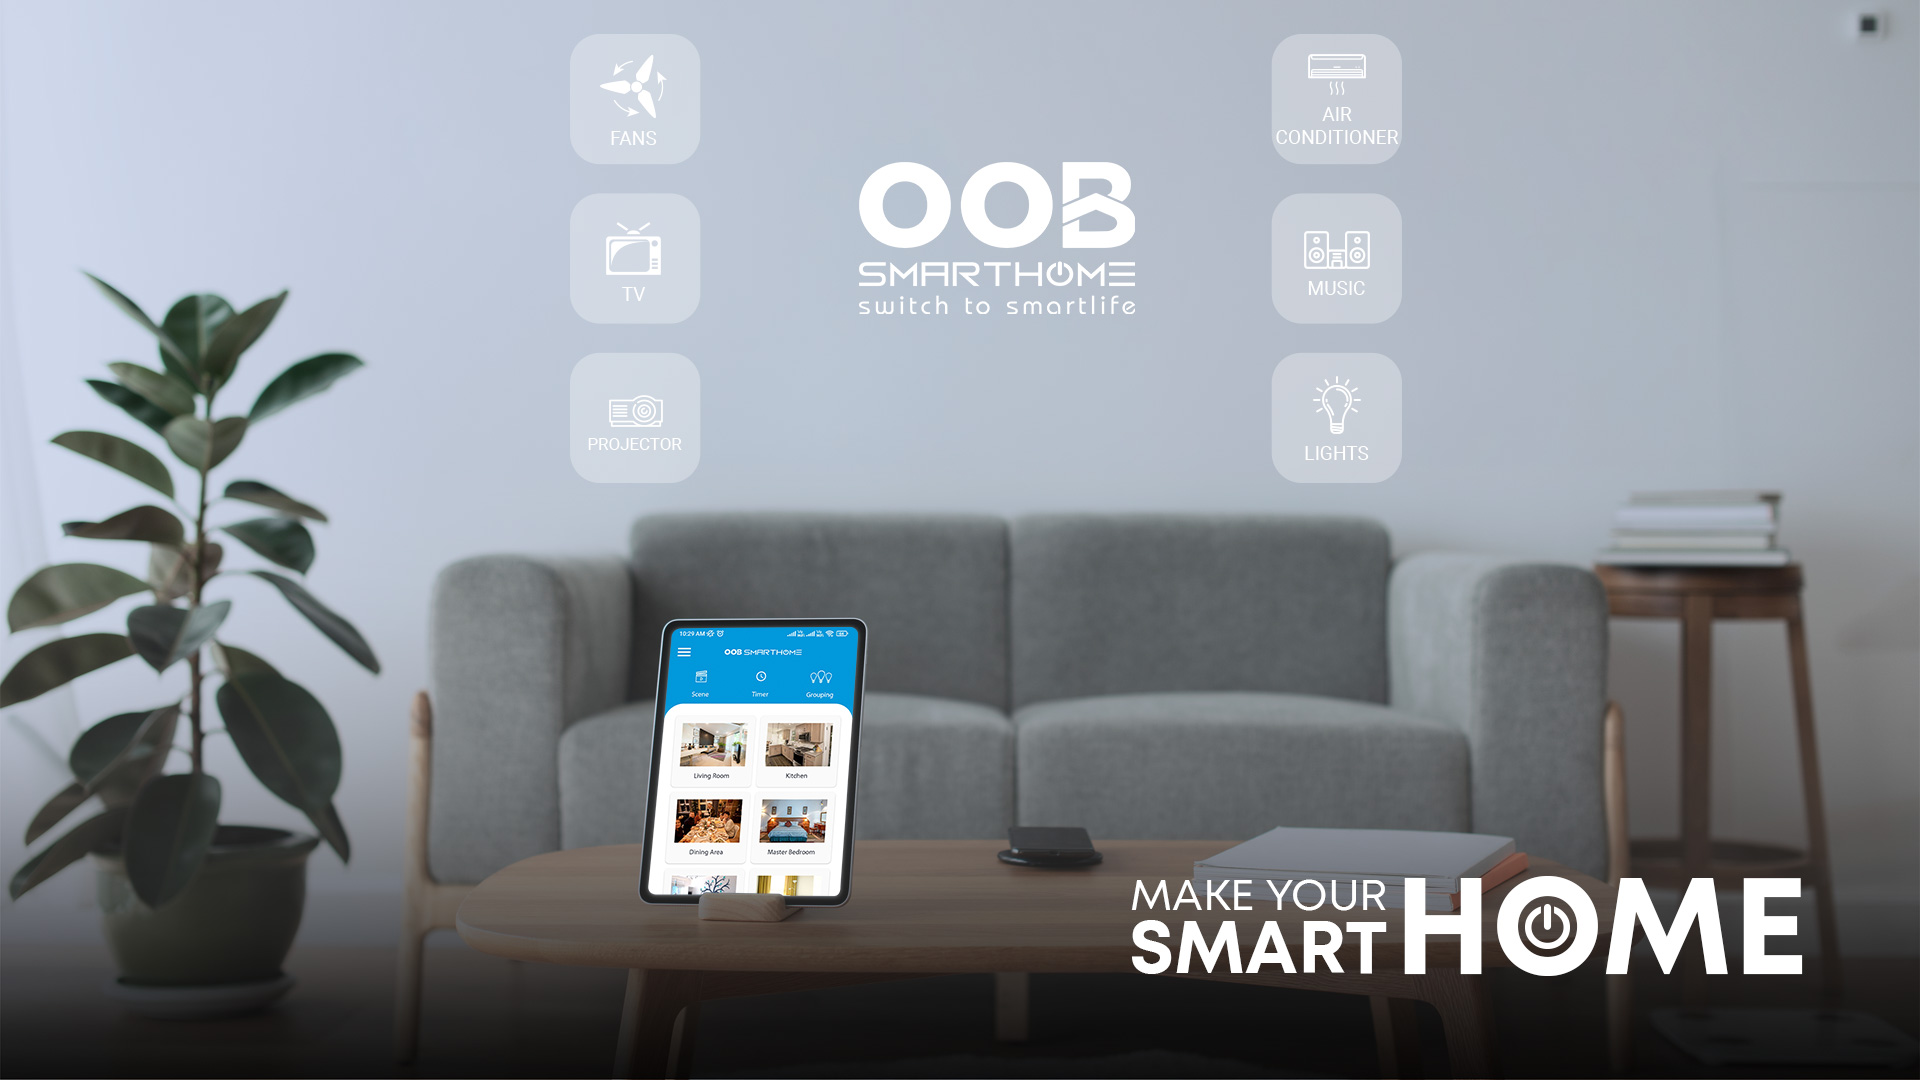 How Can You Make Your Home a Smart Home